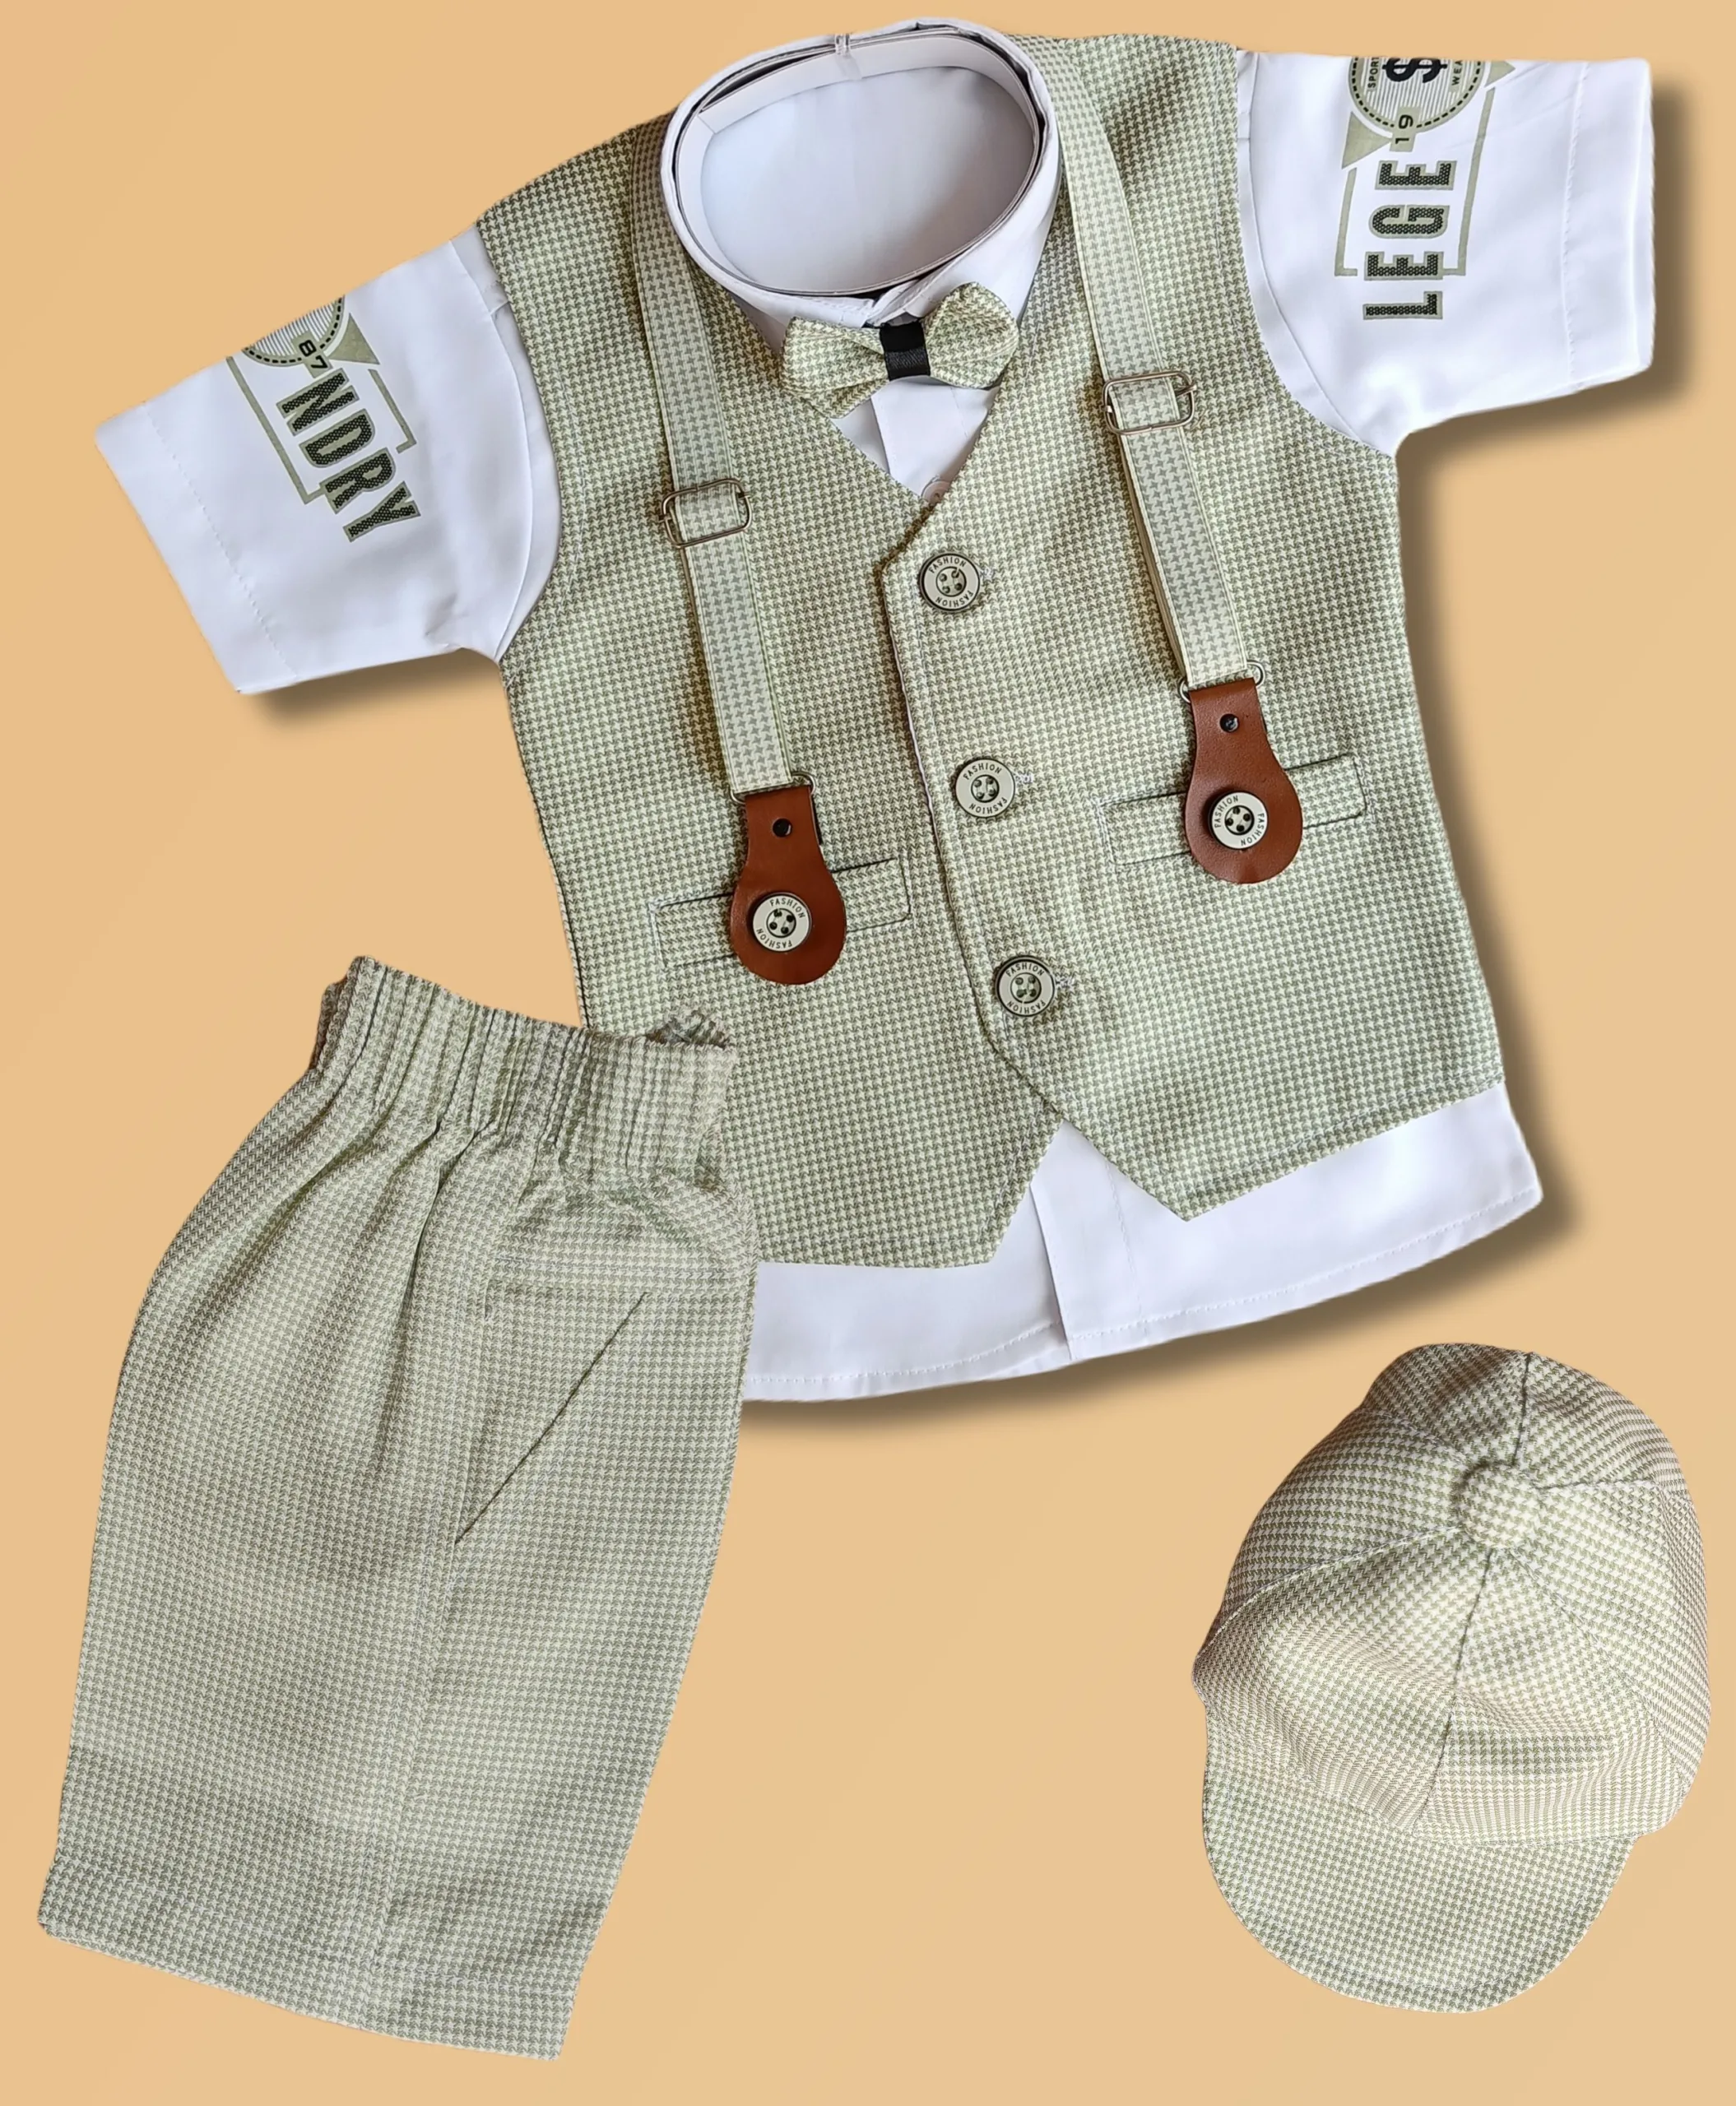 Fashionable Baby Boy Formal Wear for 6-12 Months - Infant Party Wear Dresses,  Boys 1st Birthday Outfits